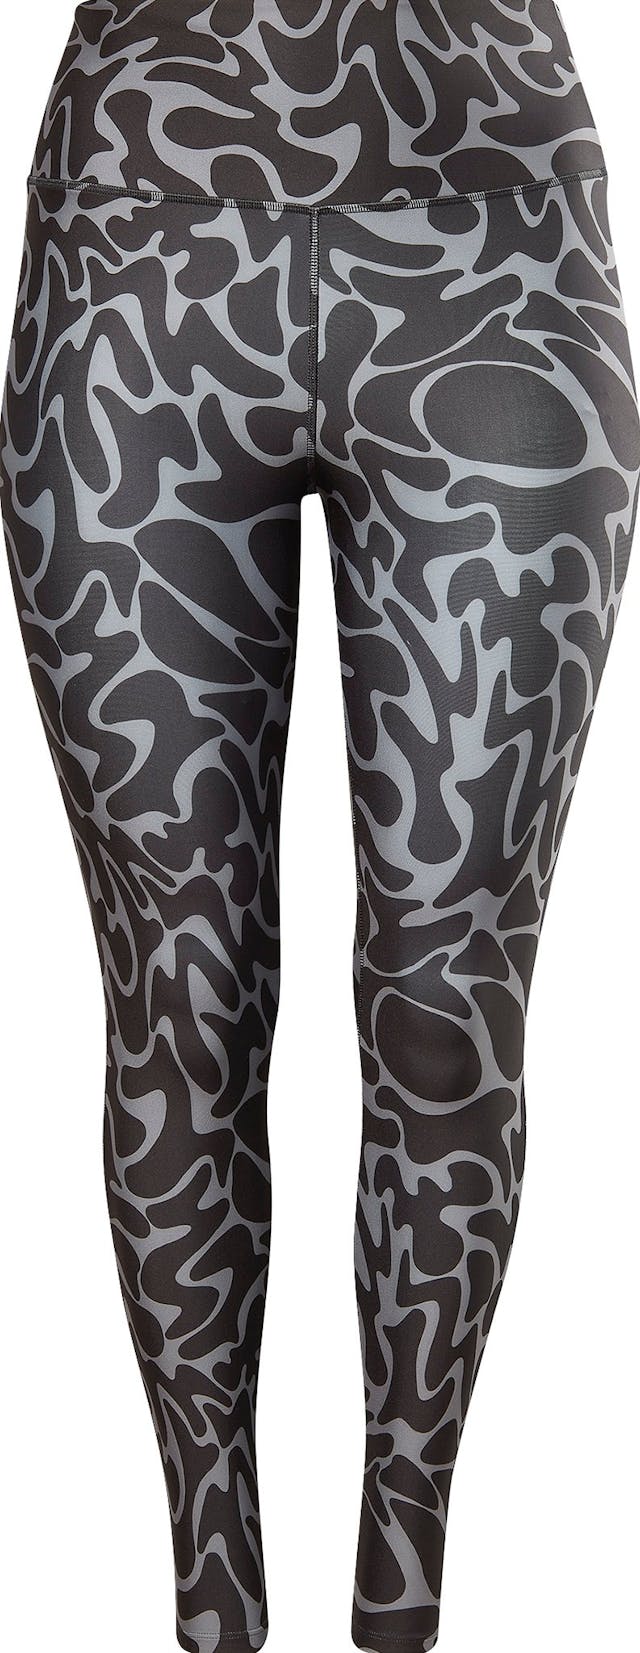 Product image for Workout Ready Plus Size Printed Leggings - Women's